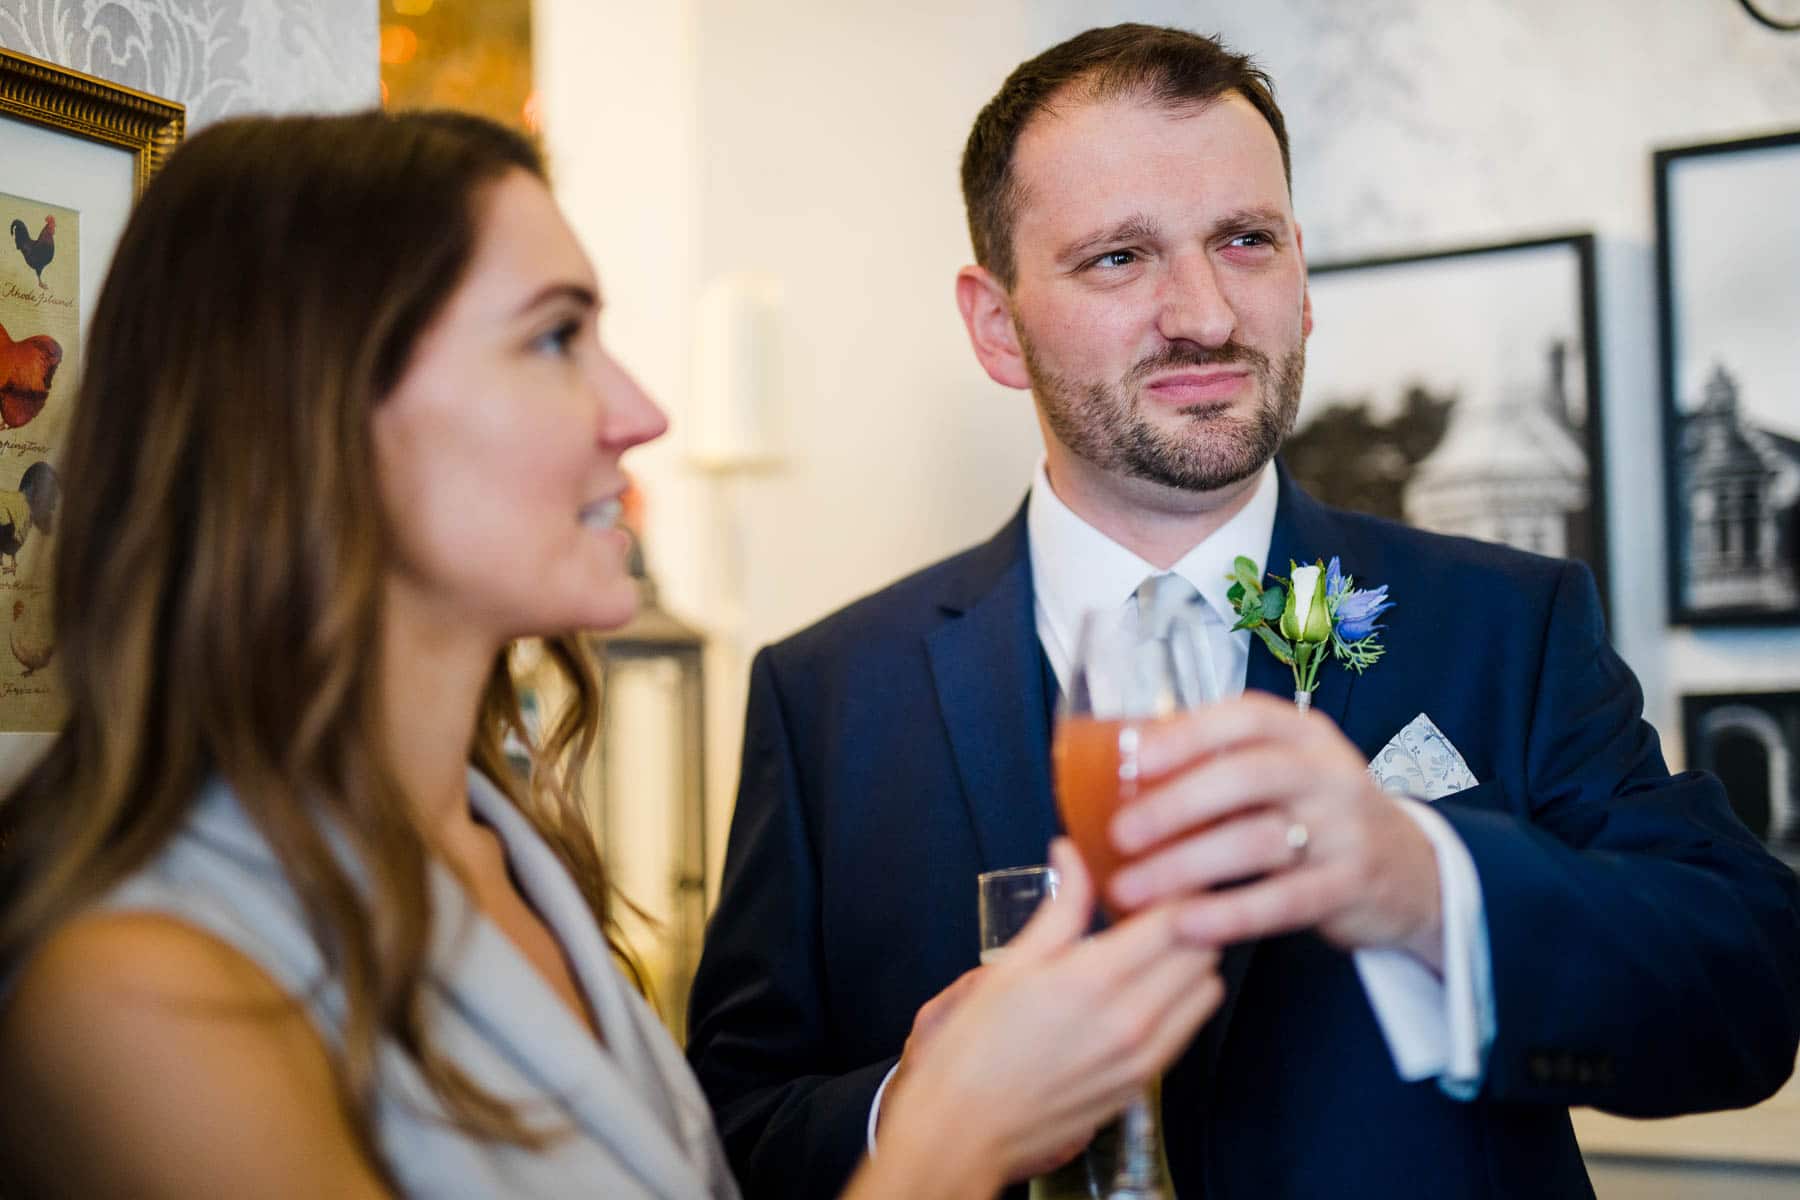 Groom not enjoying a suggested drink